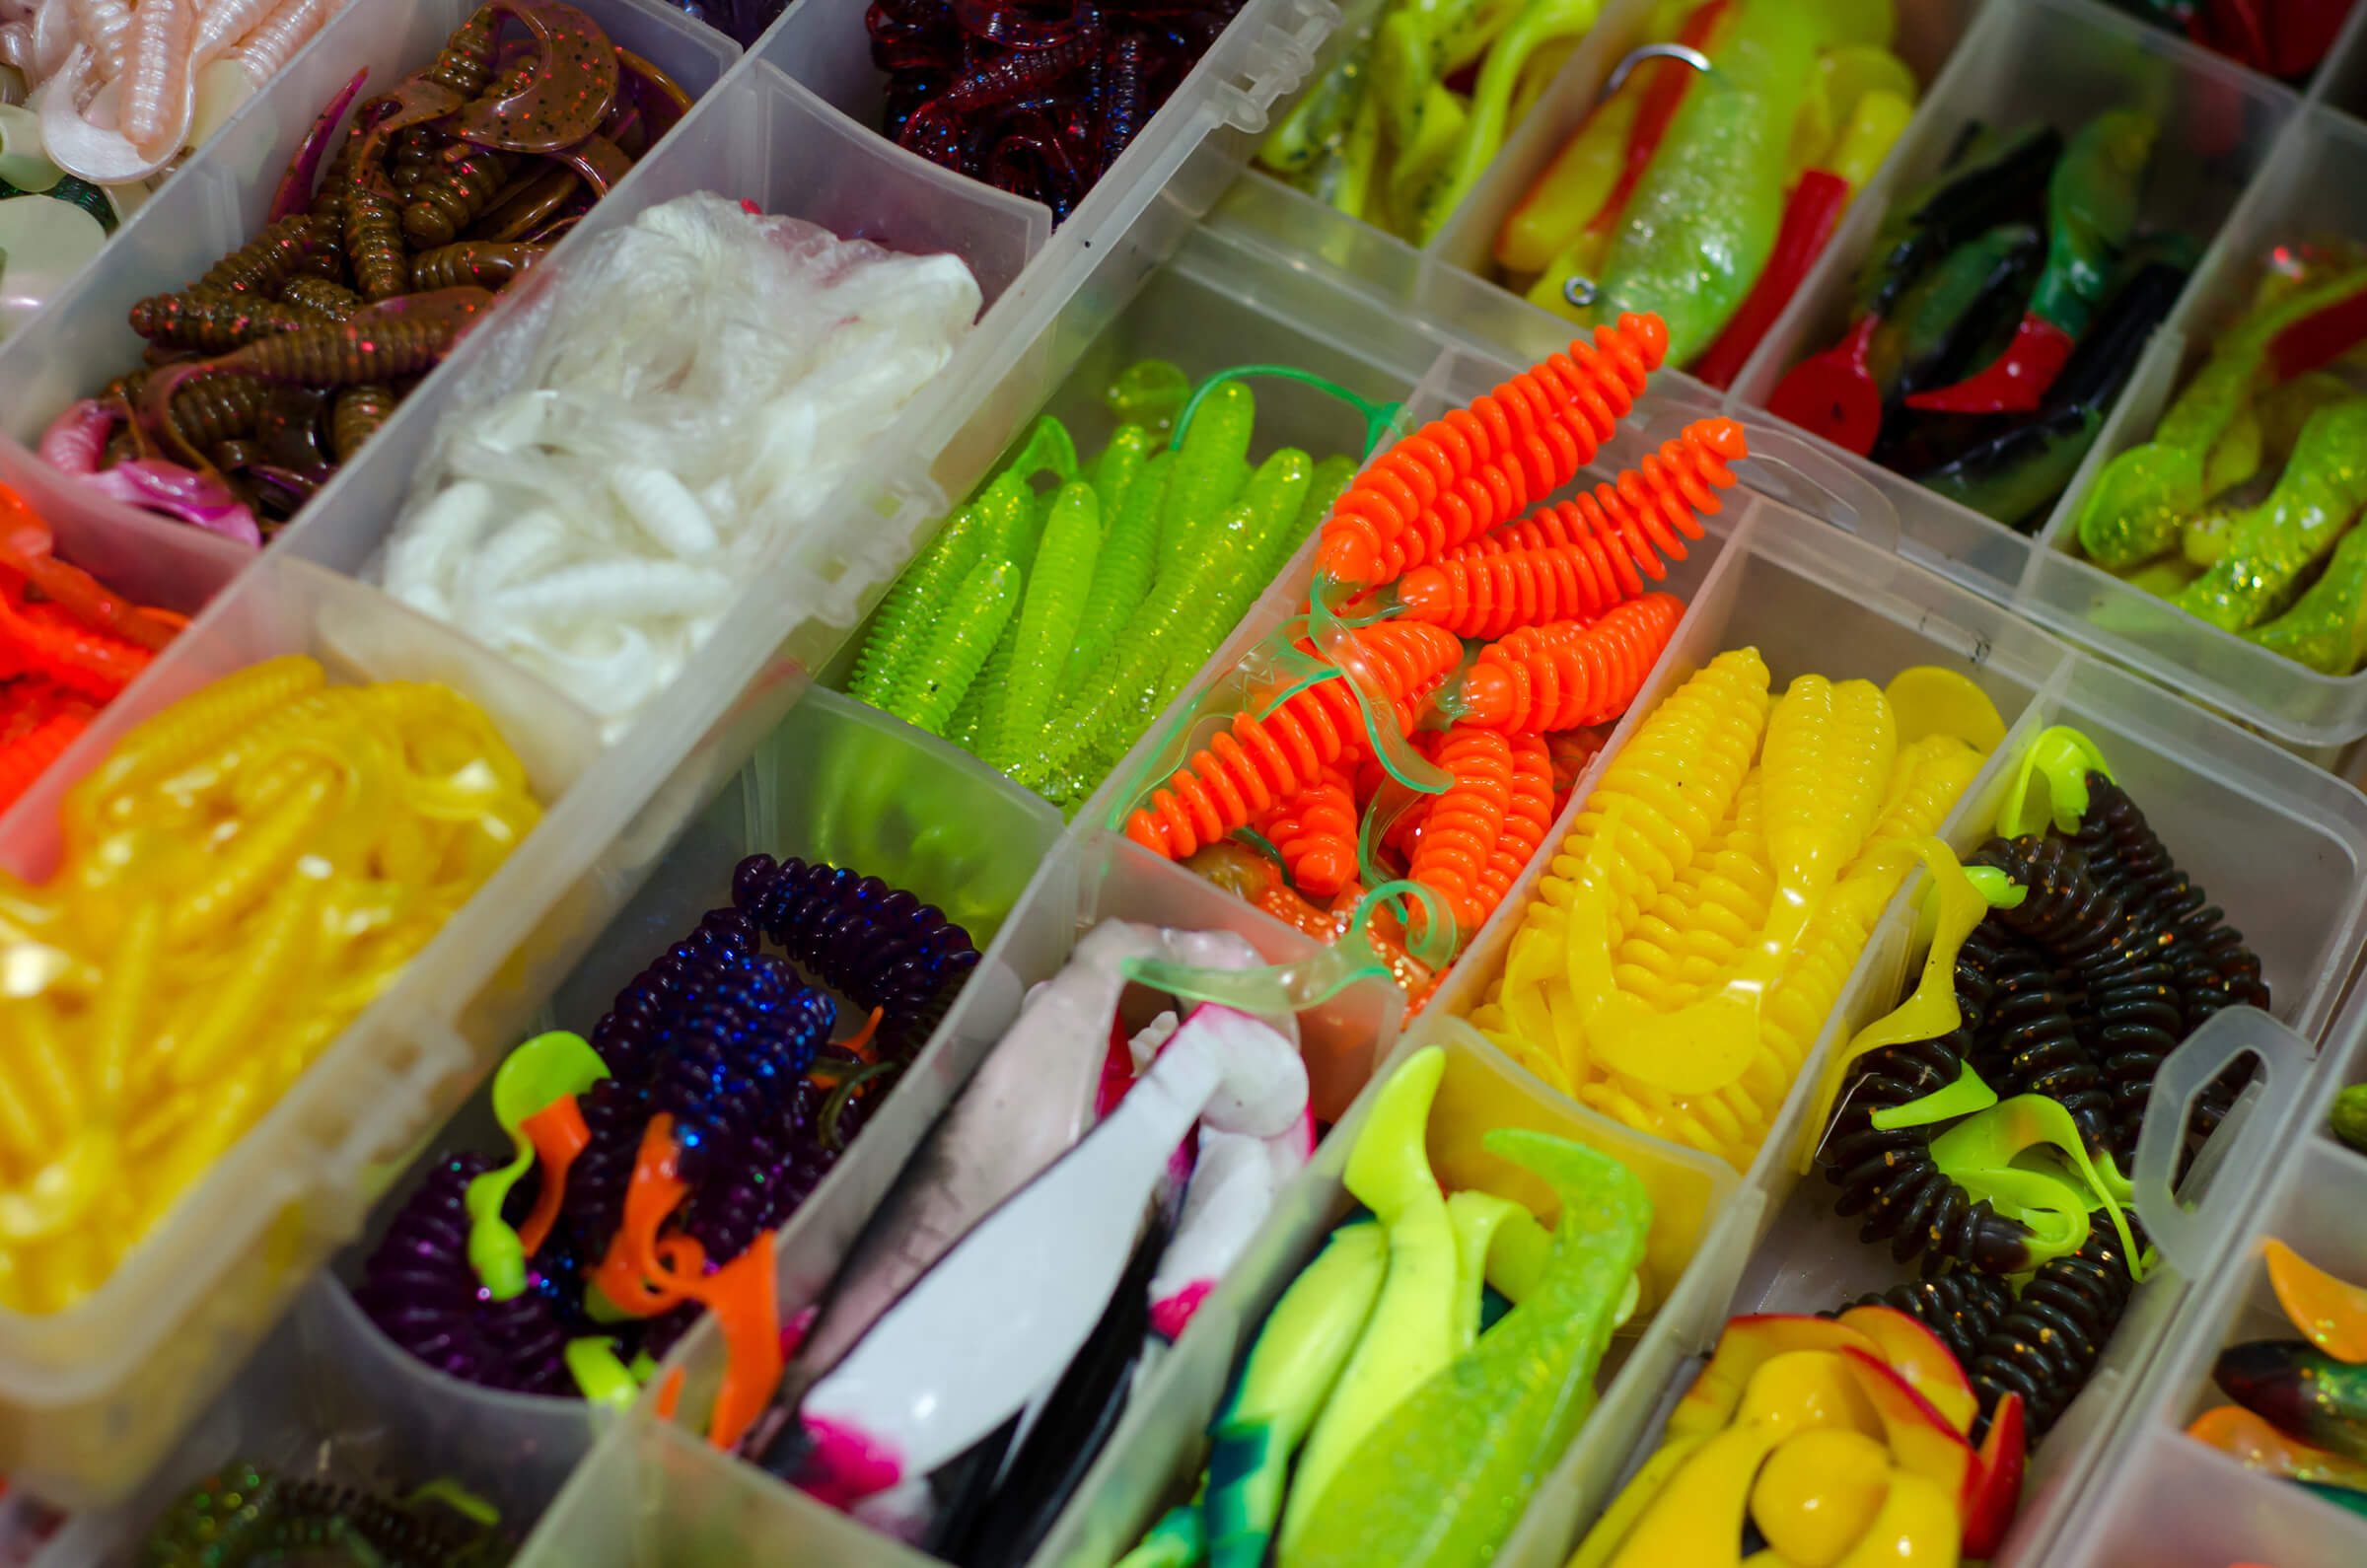 Plastisol for making fishing lures, worms